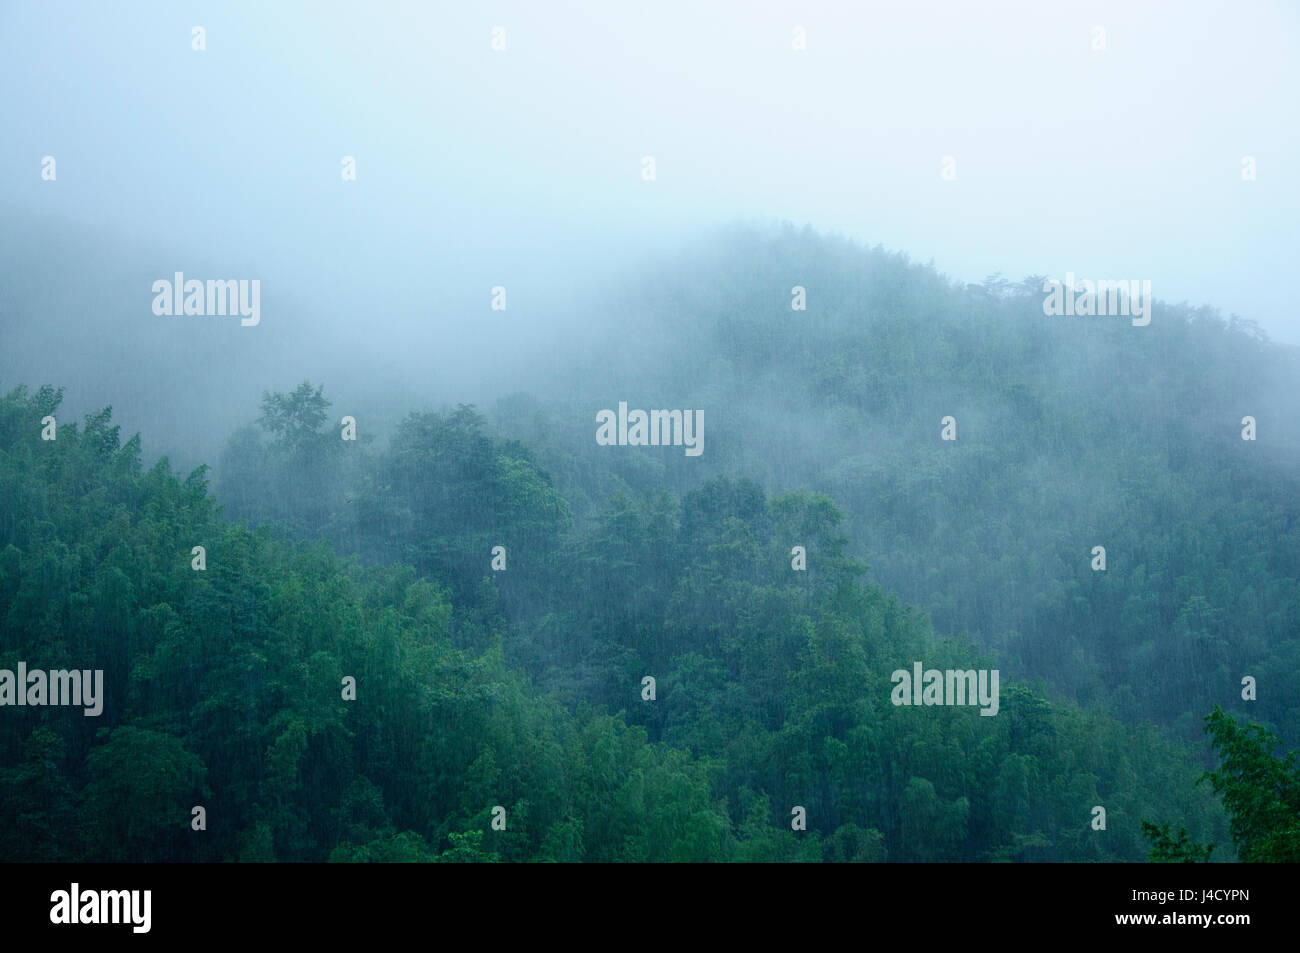 Beautiful mountains scenery in the mist Stock Photo